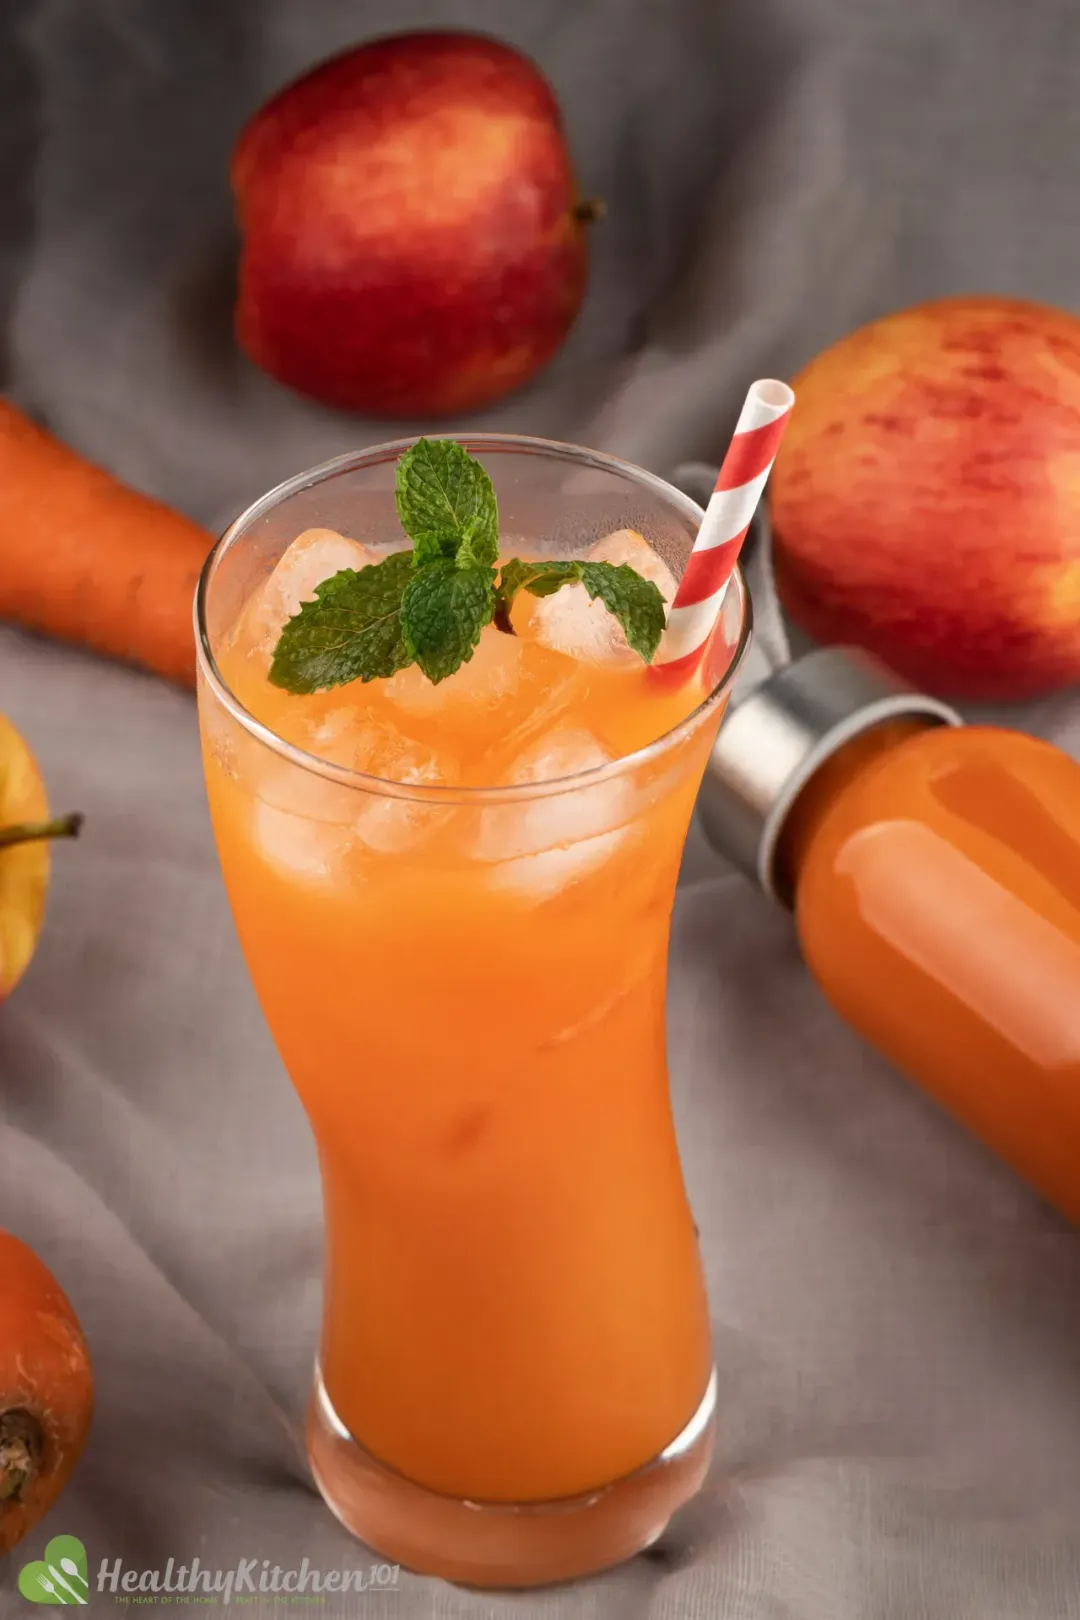 A glass of carrot juice with ice and mints, surrounded by red apples and a bottle of carrot juice